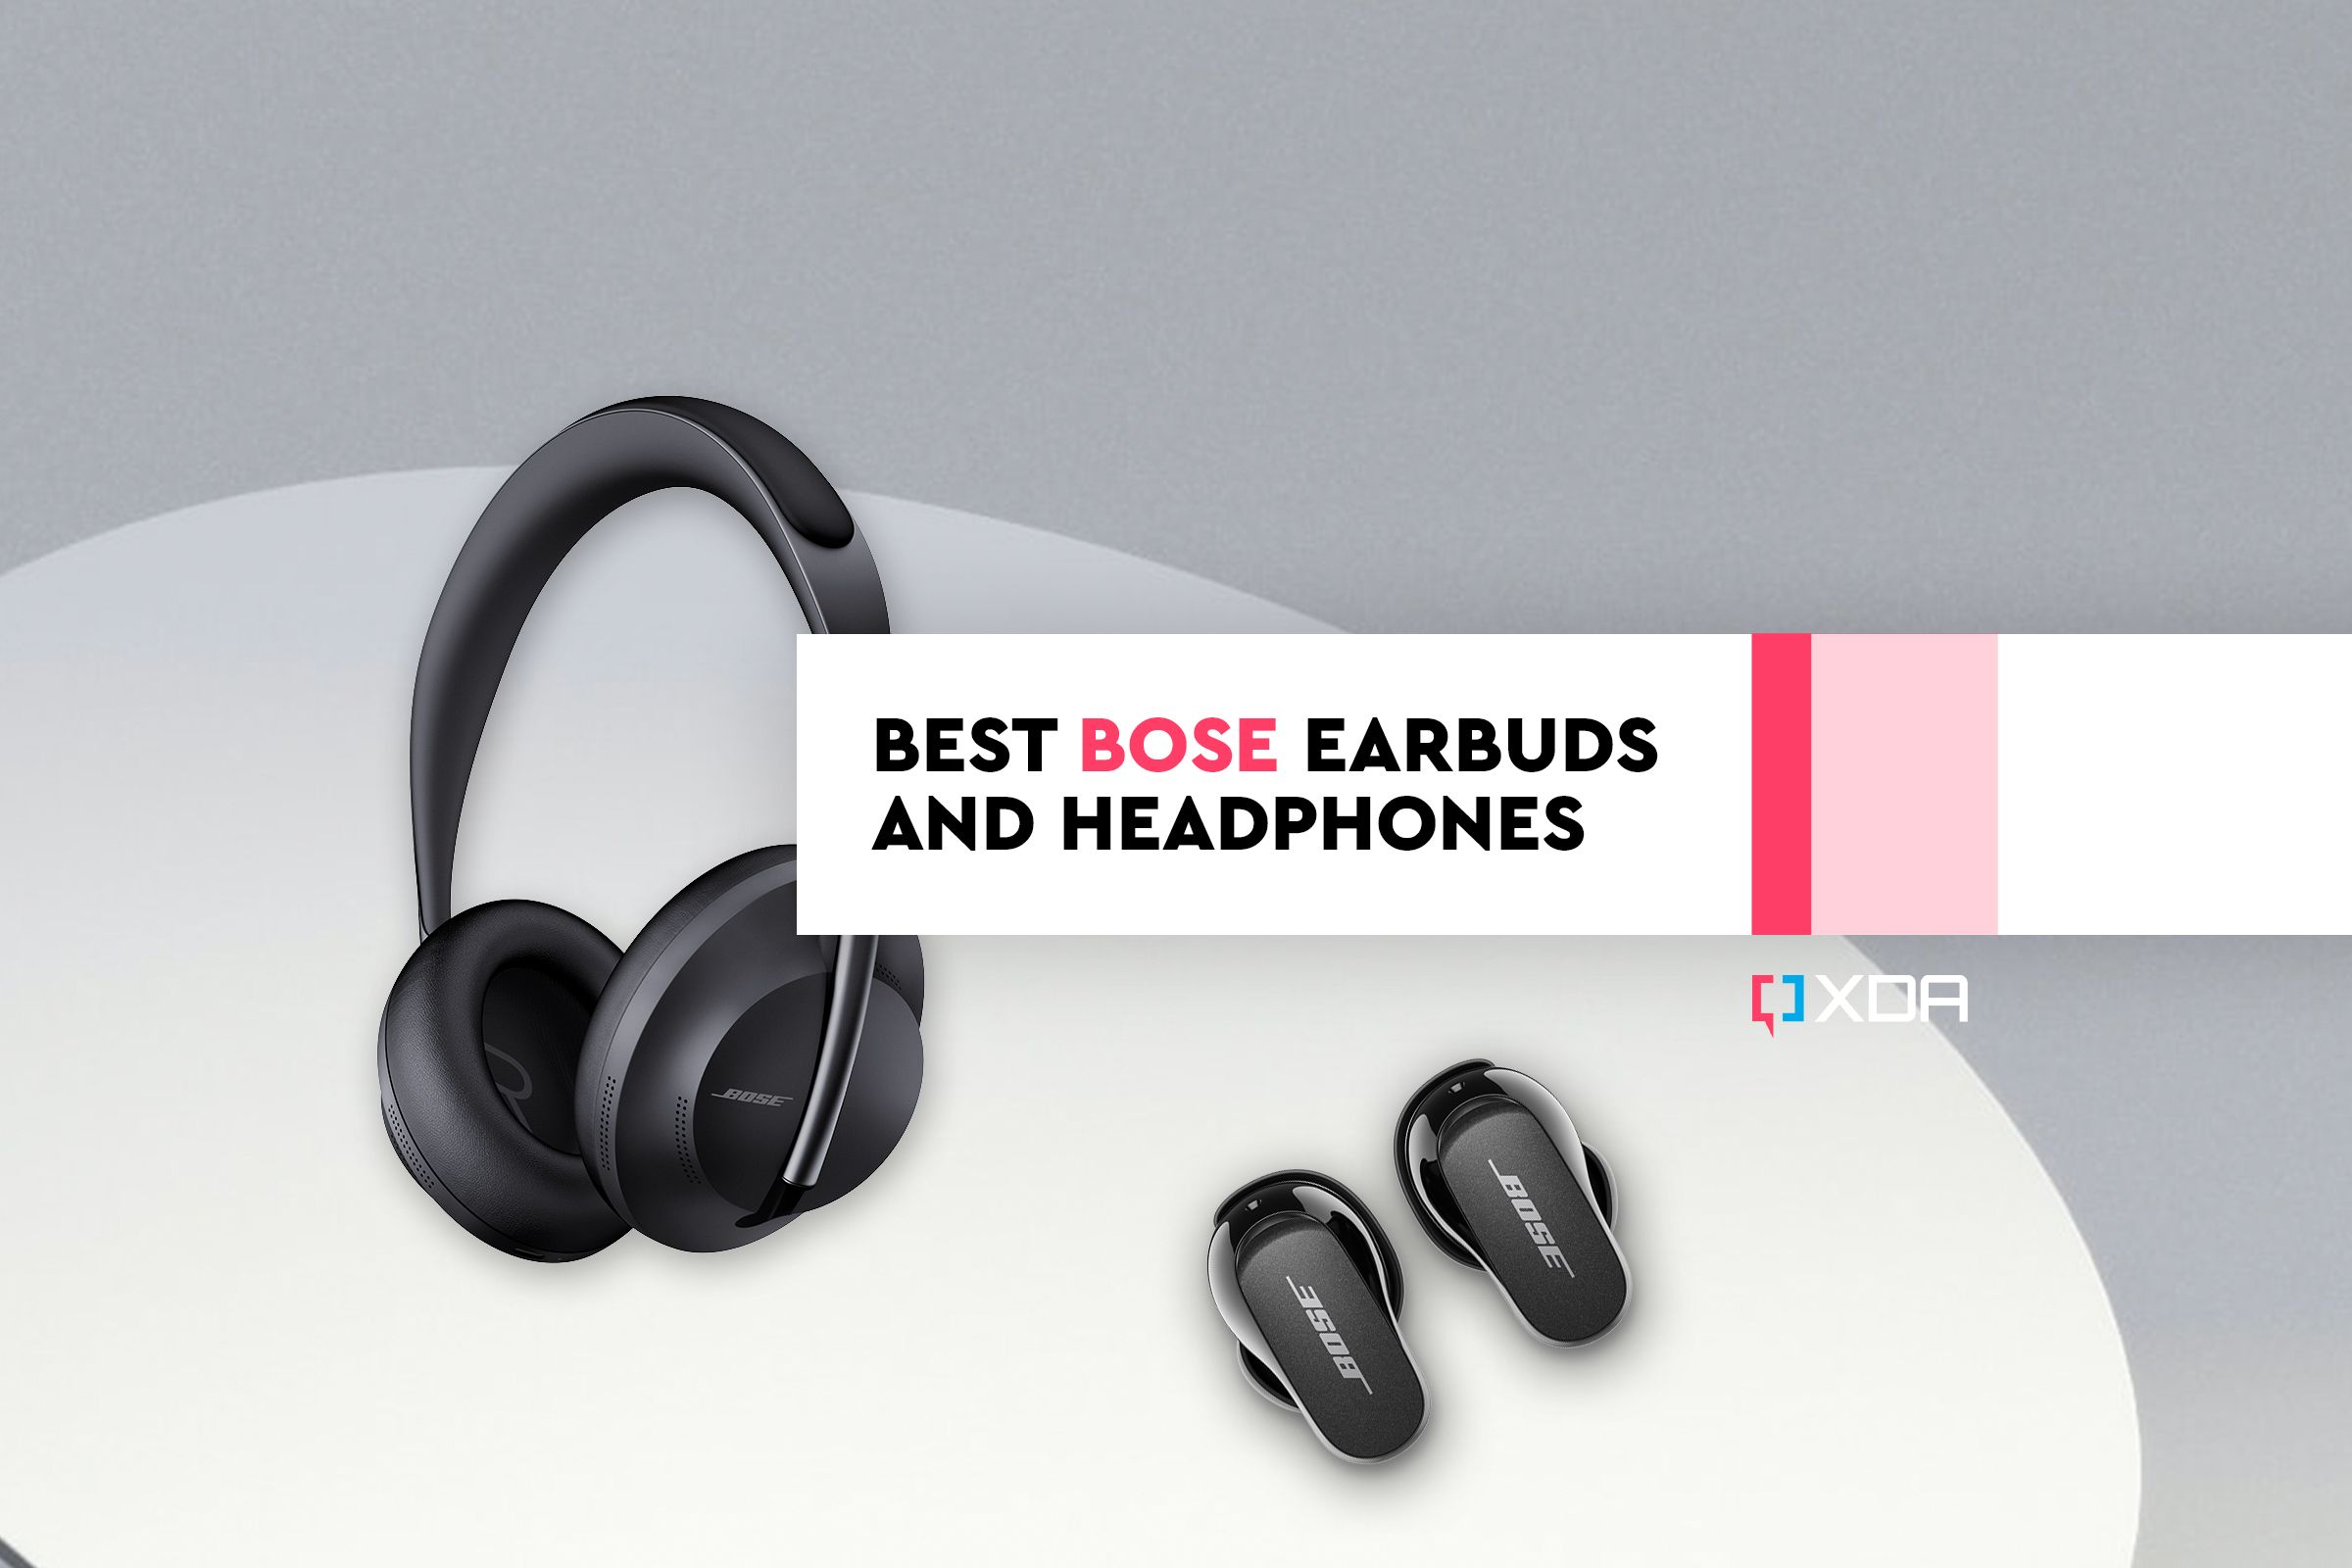 Best Bose earbuds and headphones in 2023